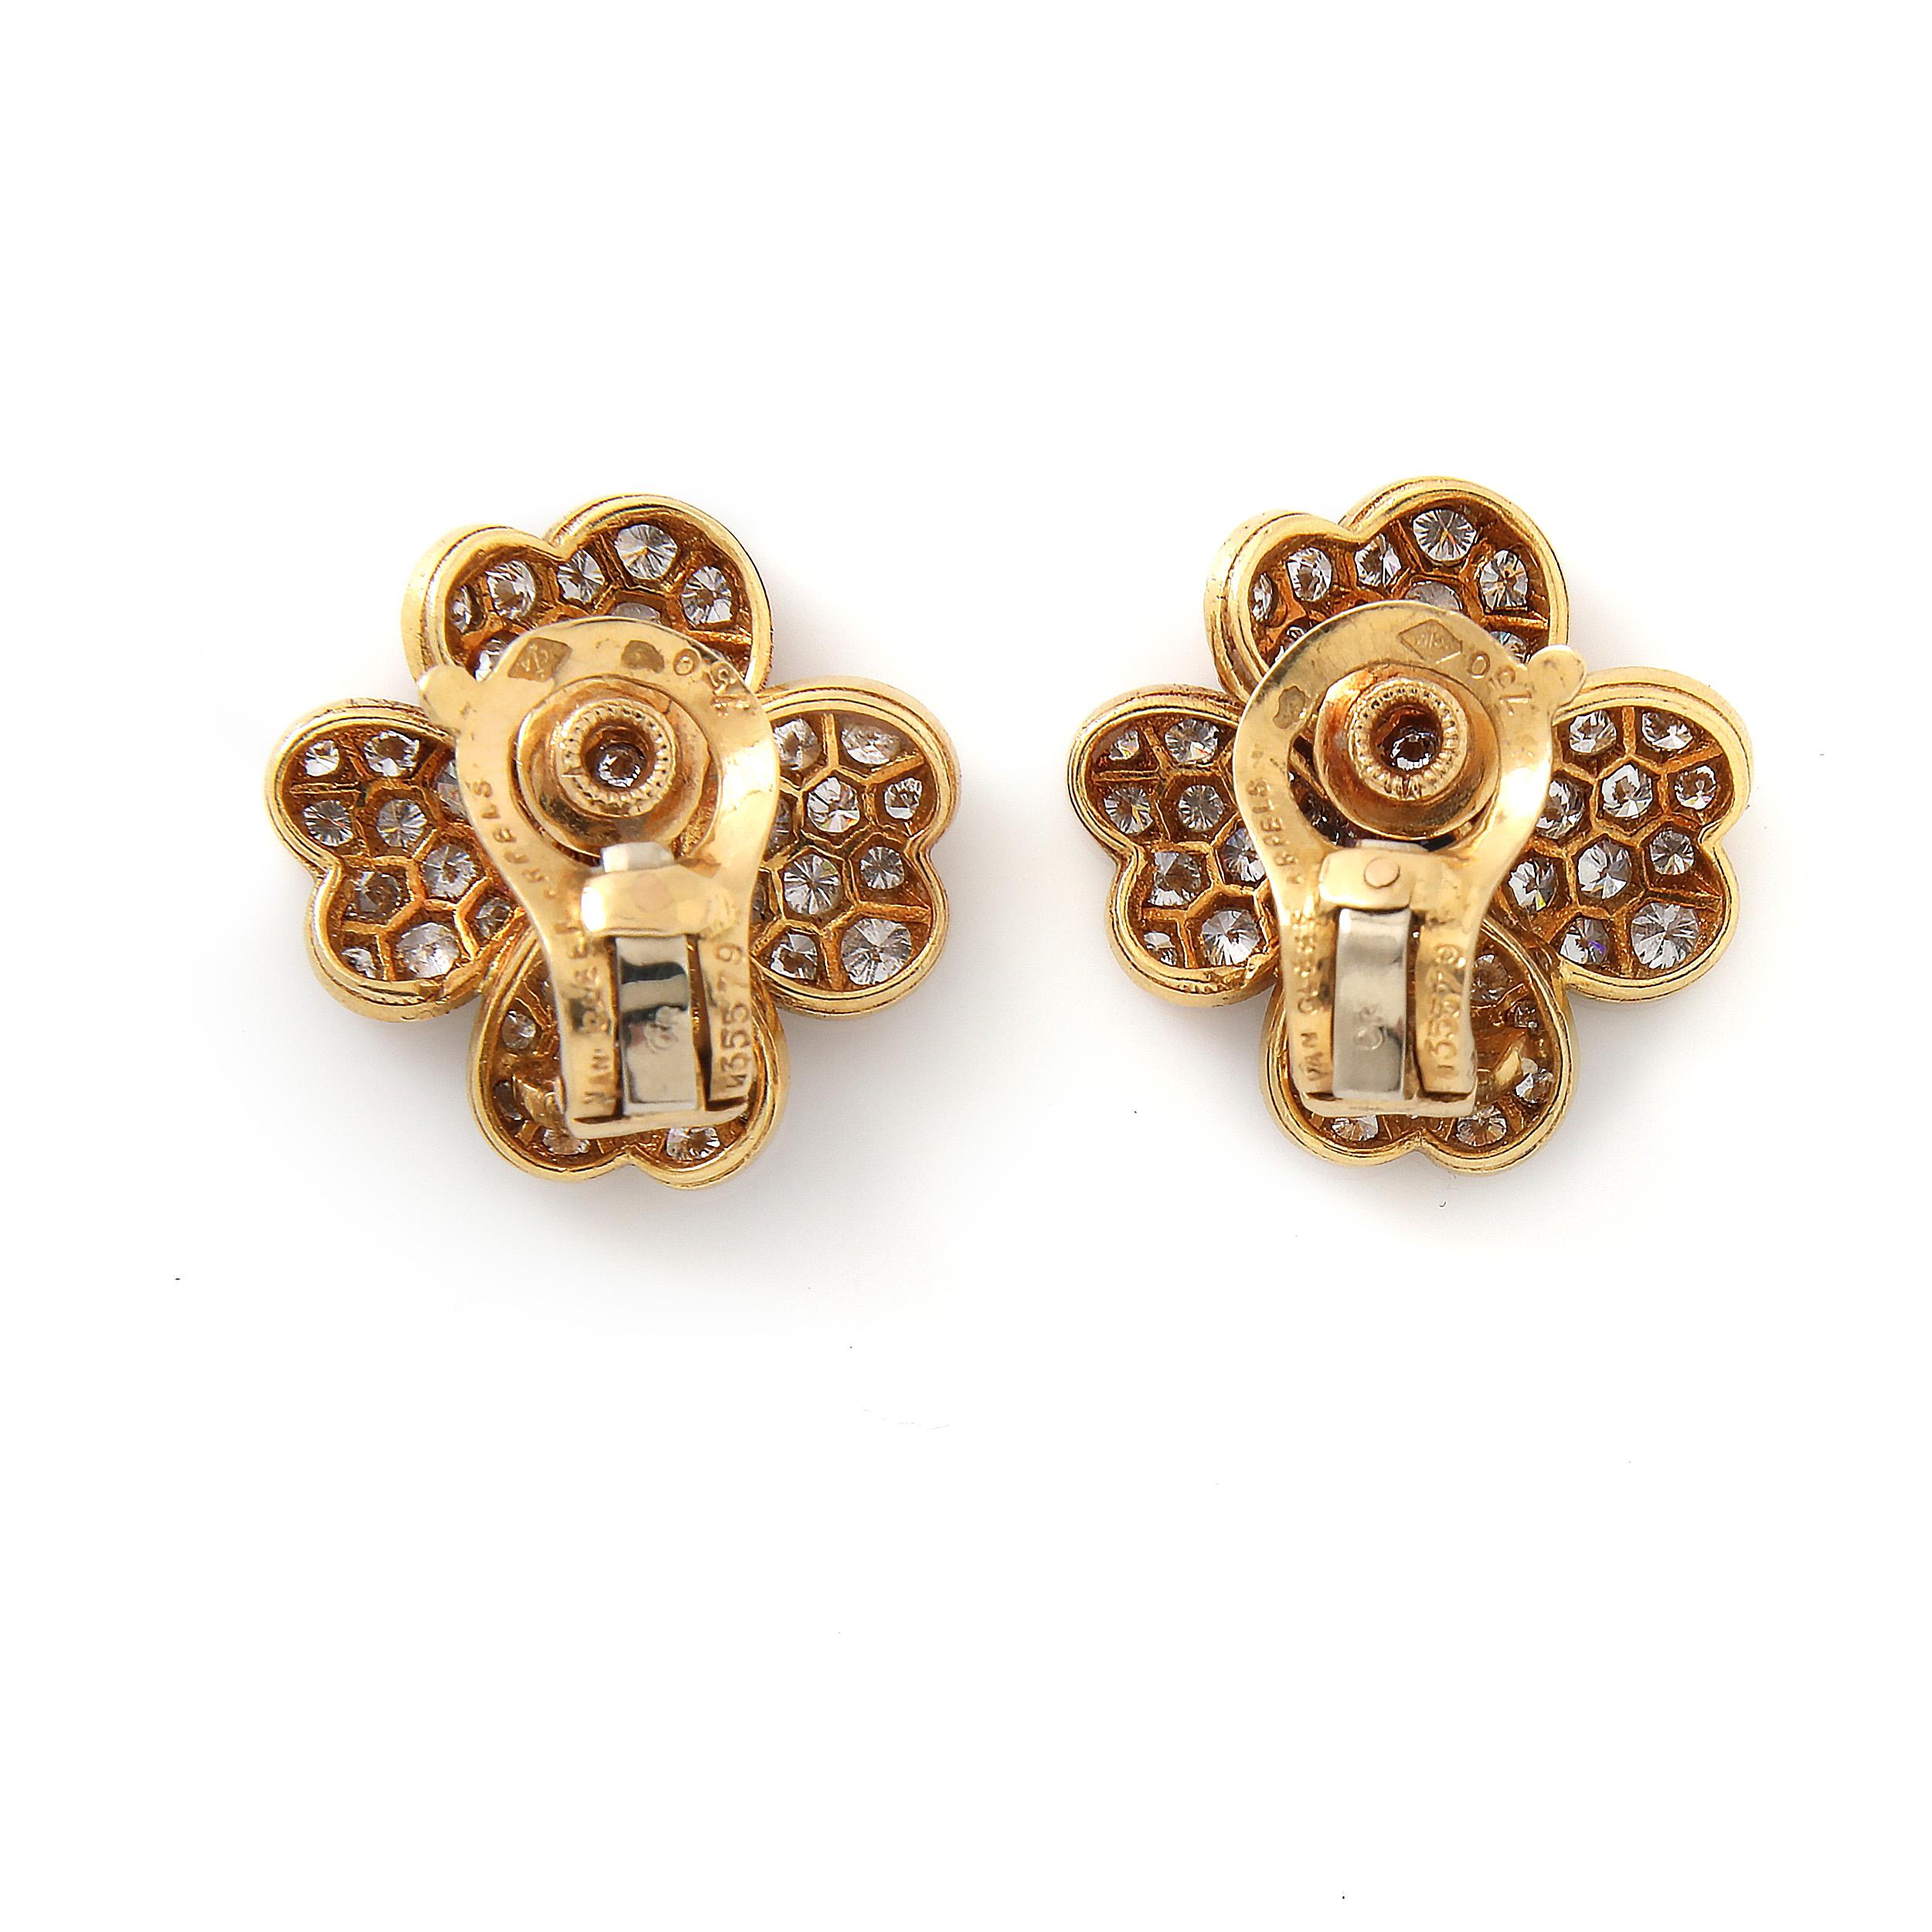 Van Cleef & Arpels 18k yellow gold, diamond, and sapphire “Cosmos” earclips. 

Medium model. Signed Van Cleef & Arpels with serial number and french marks.

¾ inch diameter